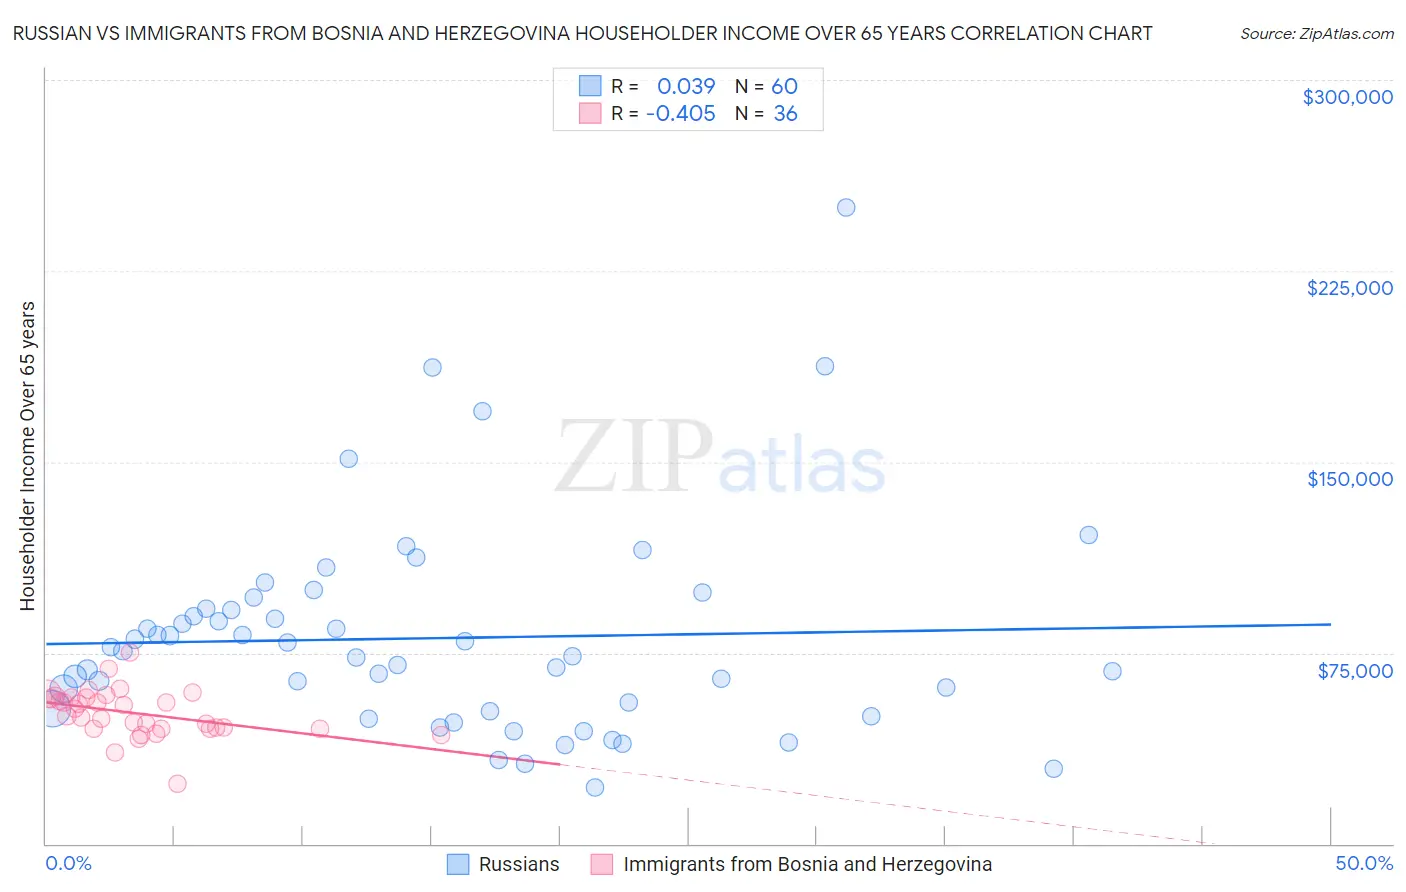 Russian vs Immigrants from Bosnia and Herzegovina Householder Income Over 65 years